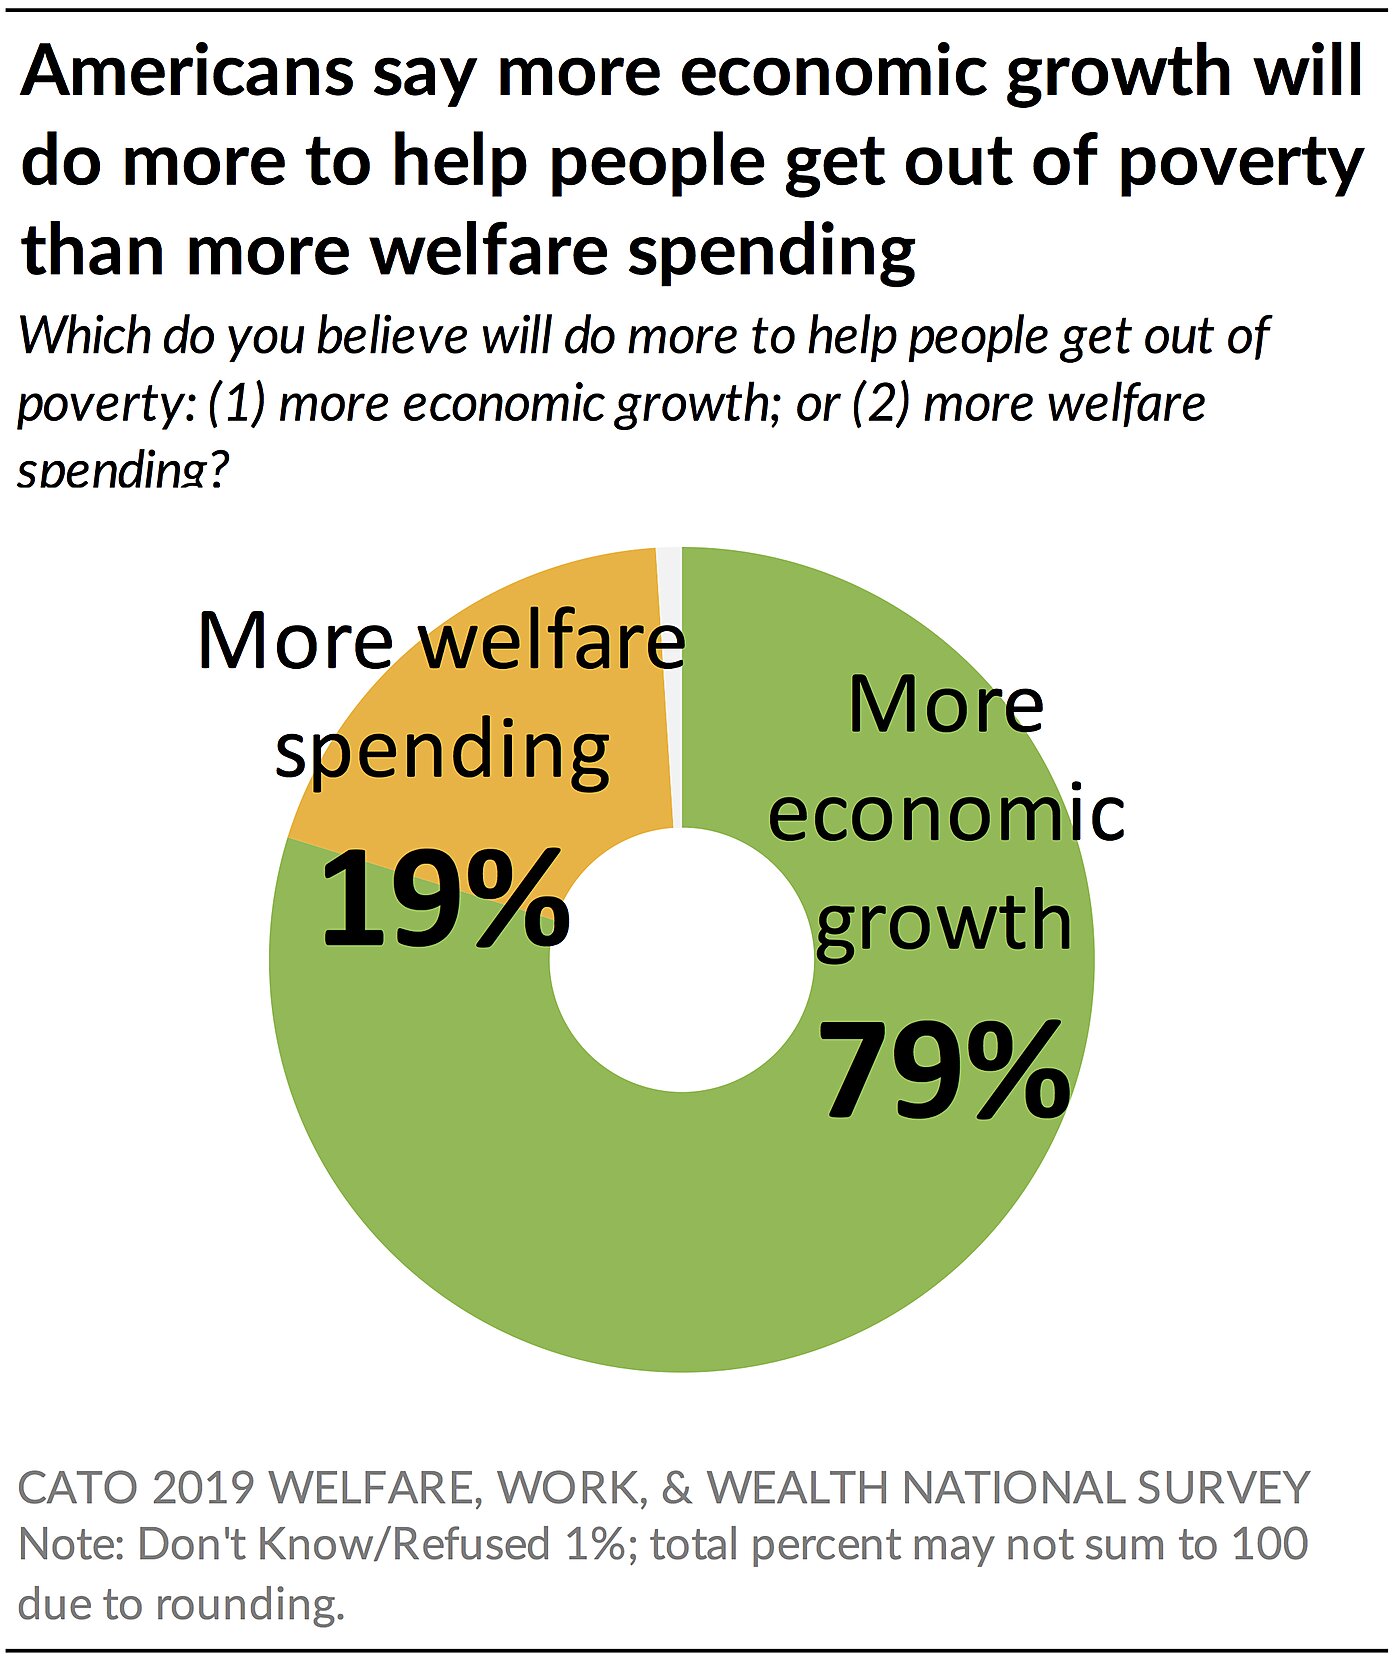 Americans say more economic growth will do more to help people get out of poverty than more welfare spending